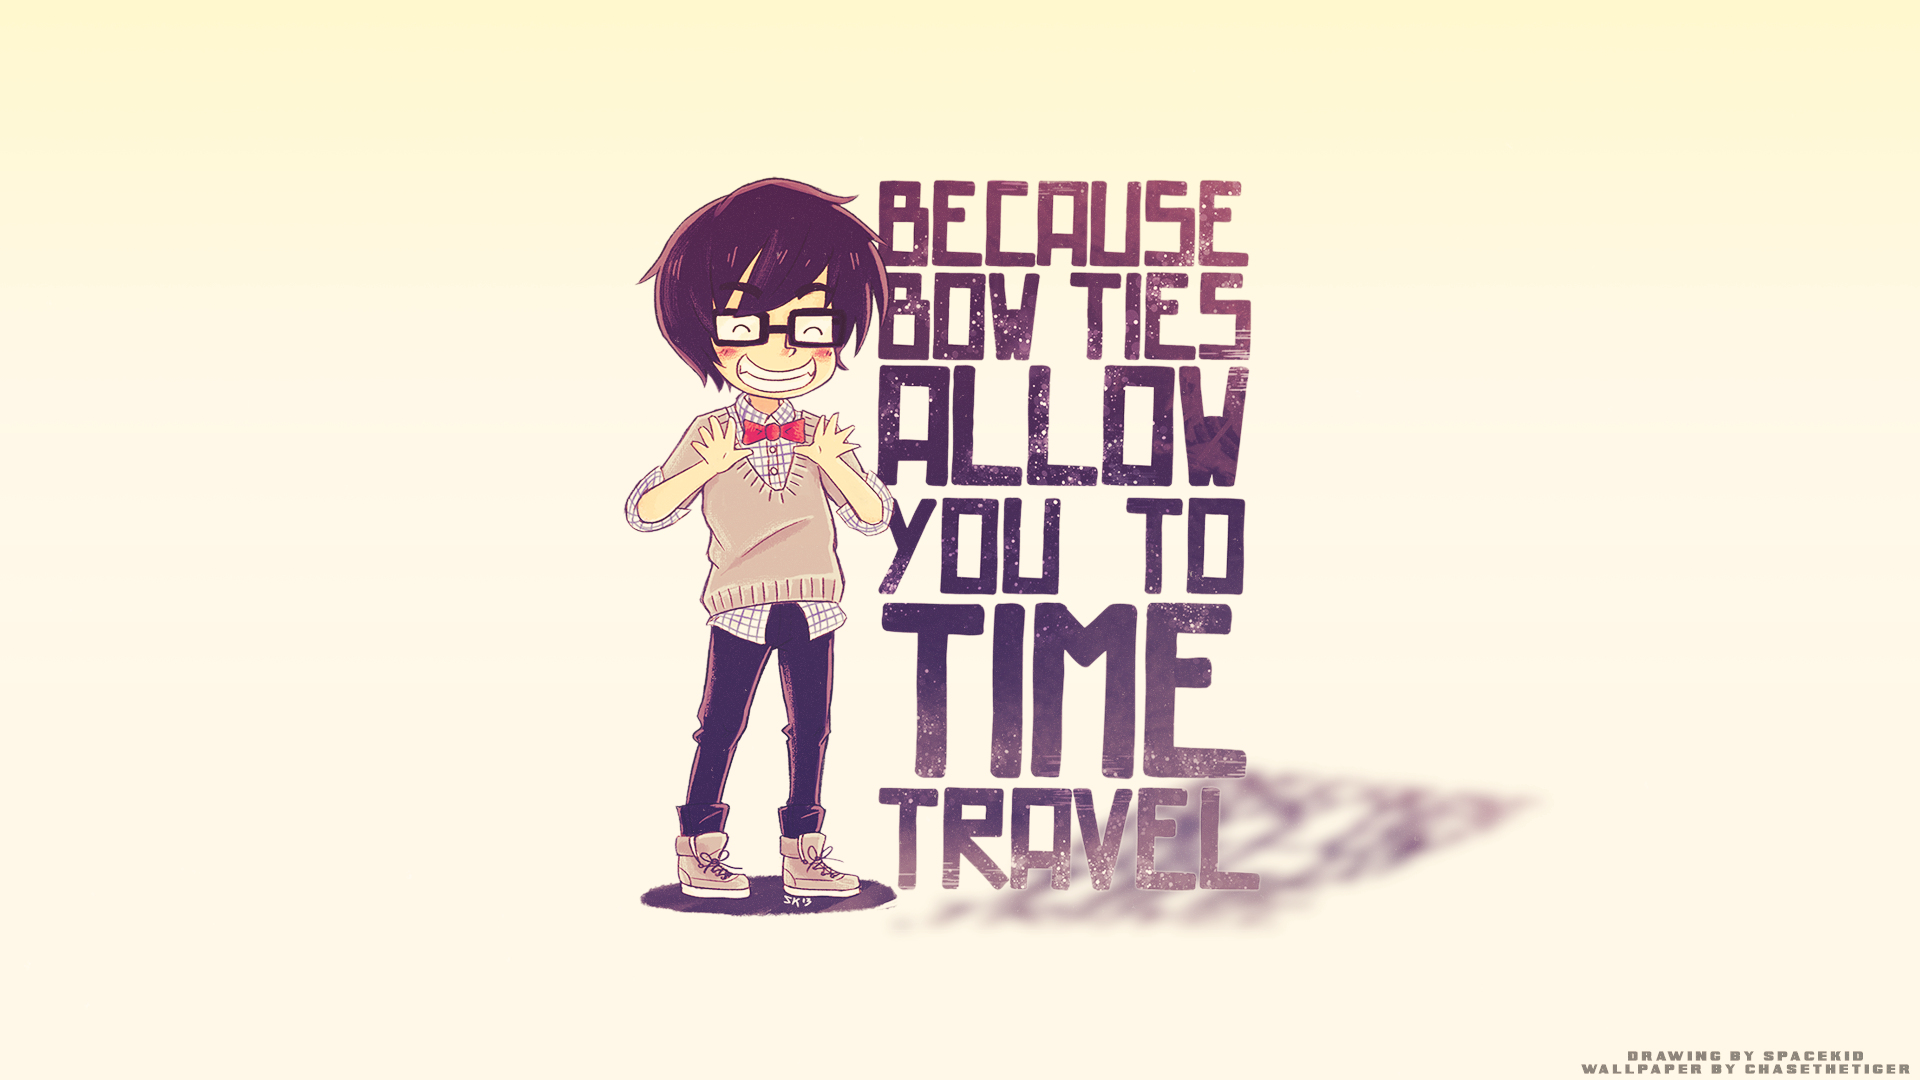 Spacekid wallpaper [Time Travel Bow Ties] by DoctorChase on